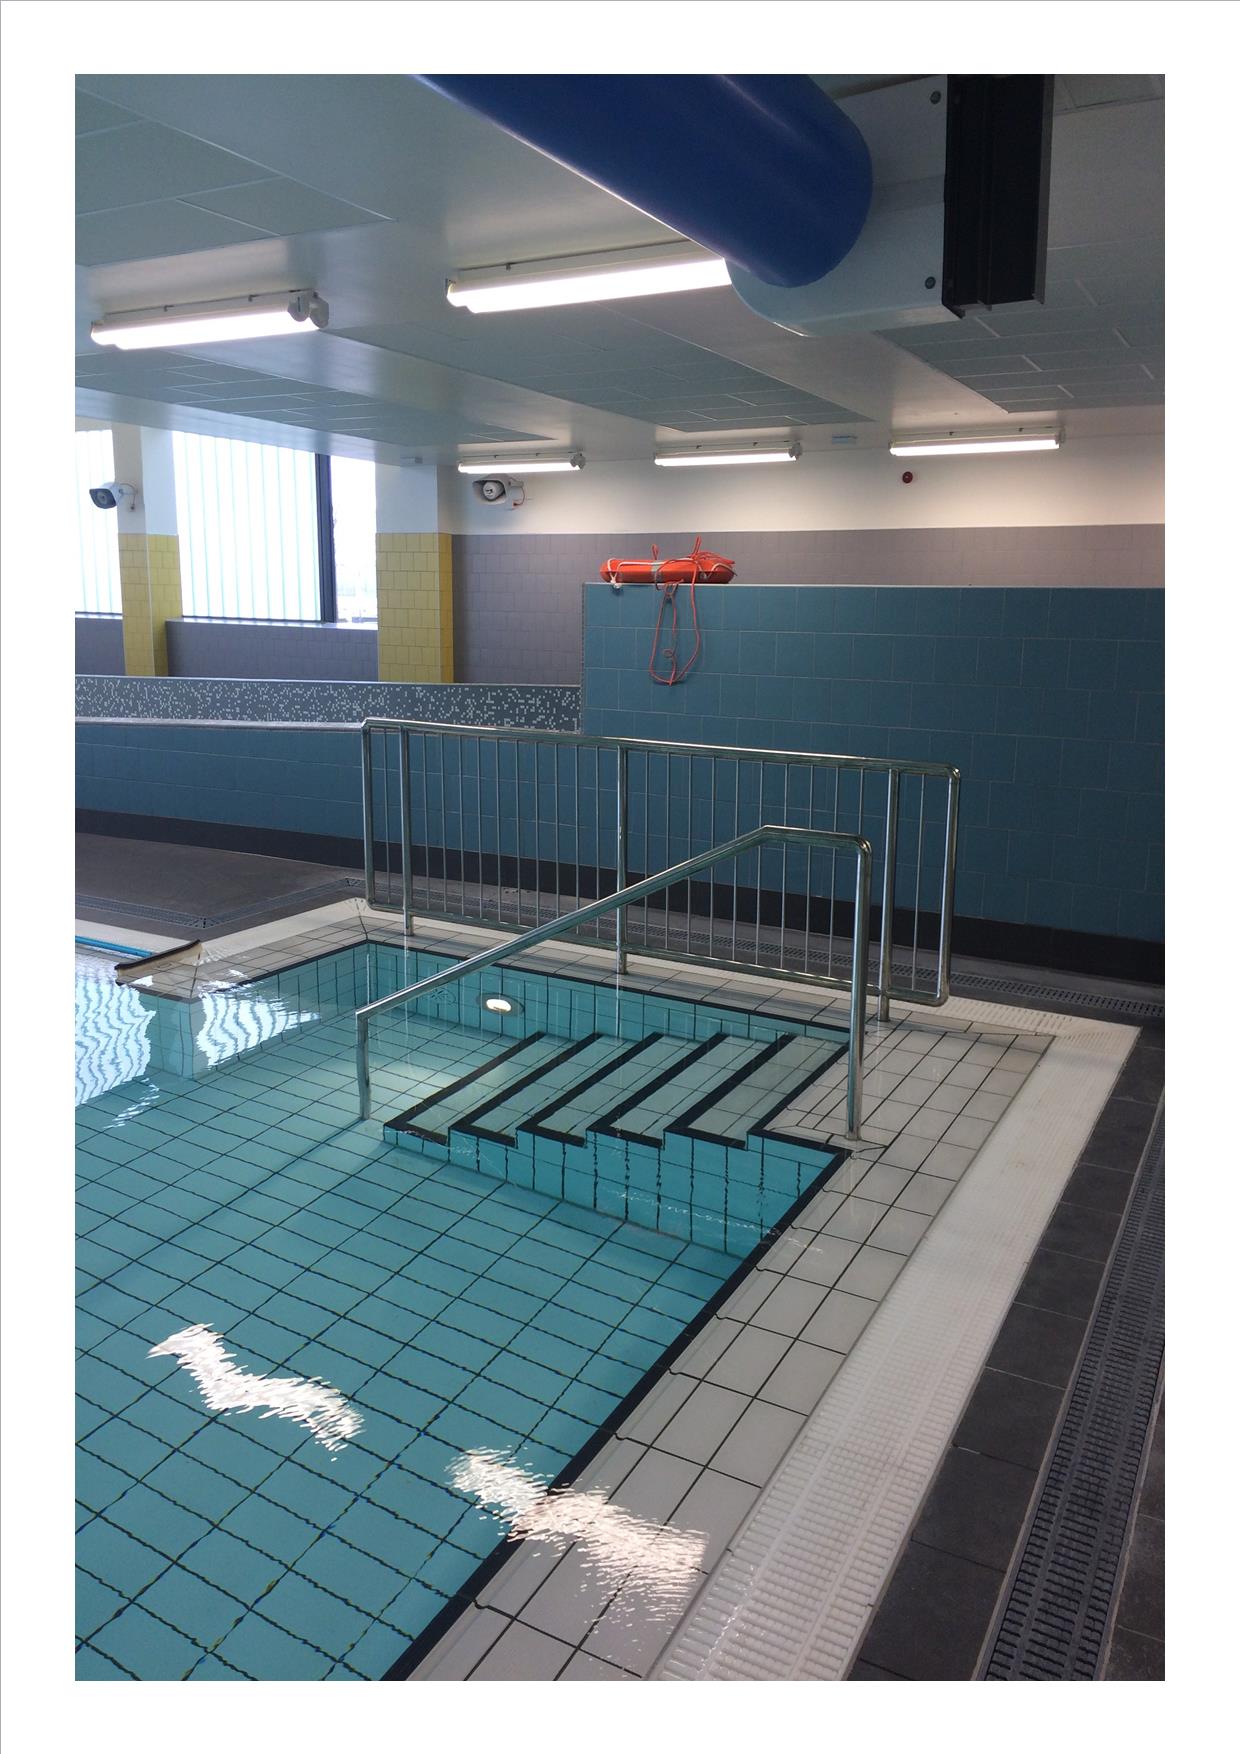 image of access to teaching pool